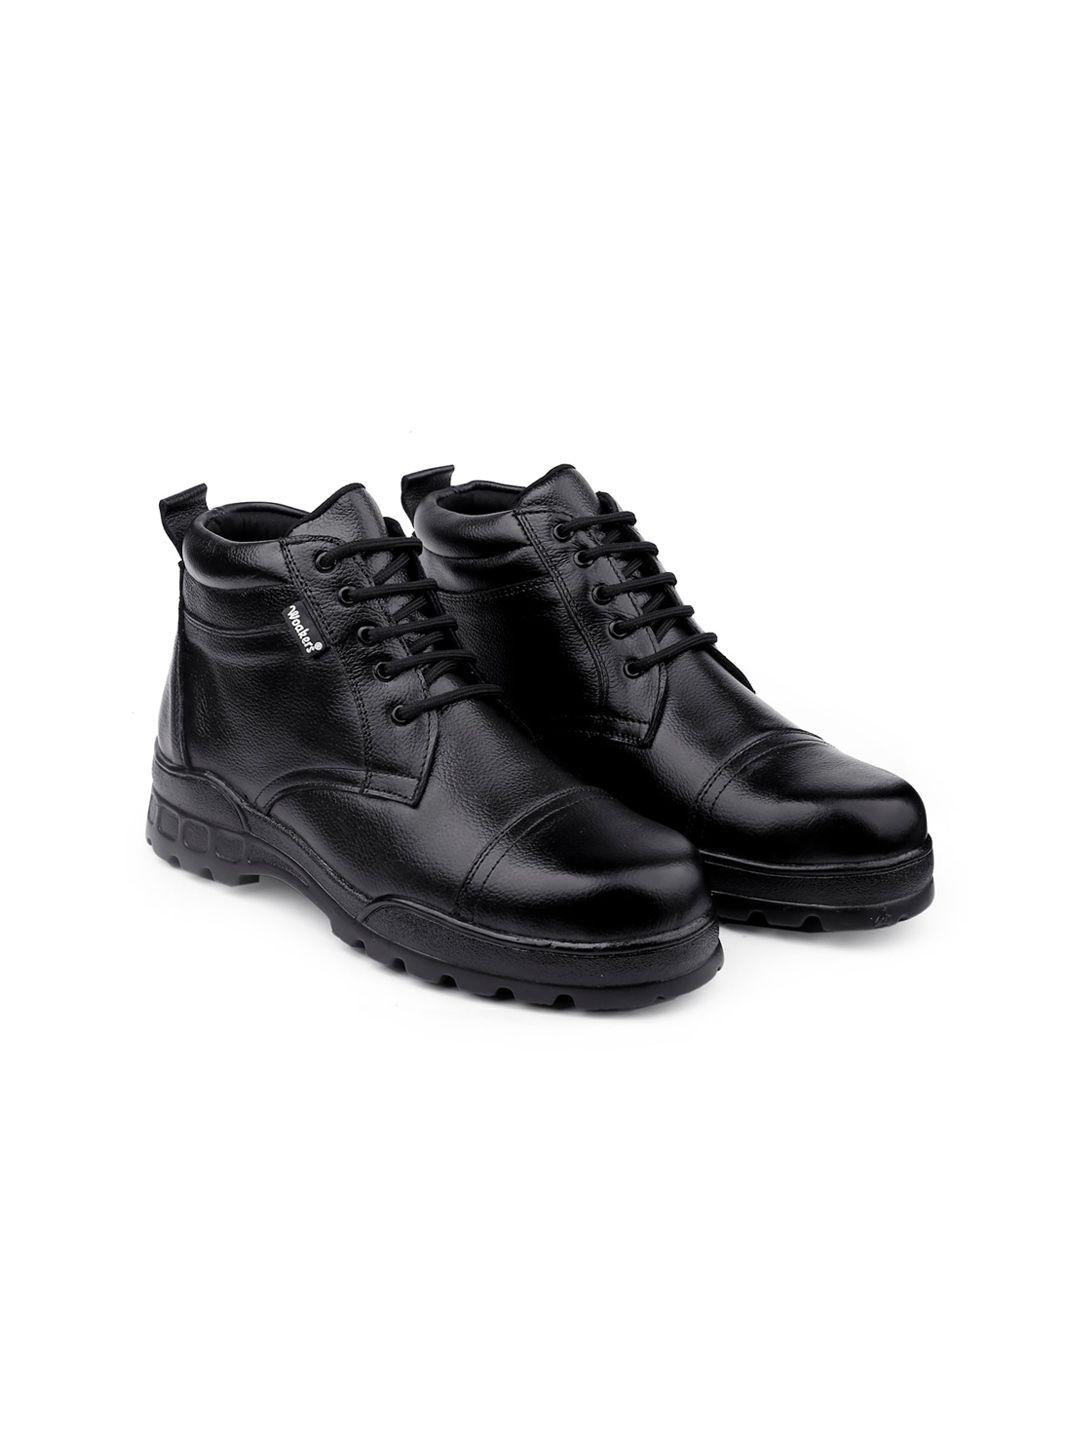 woakers men black leather boots